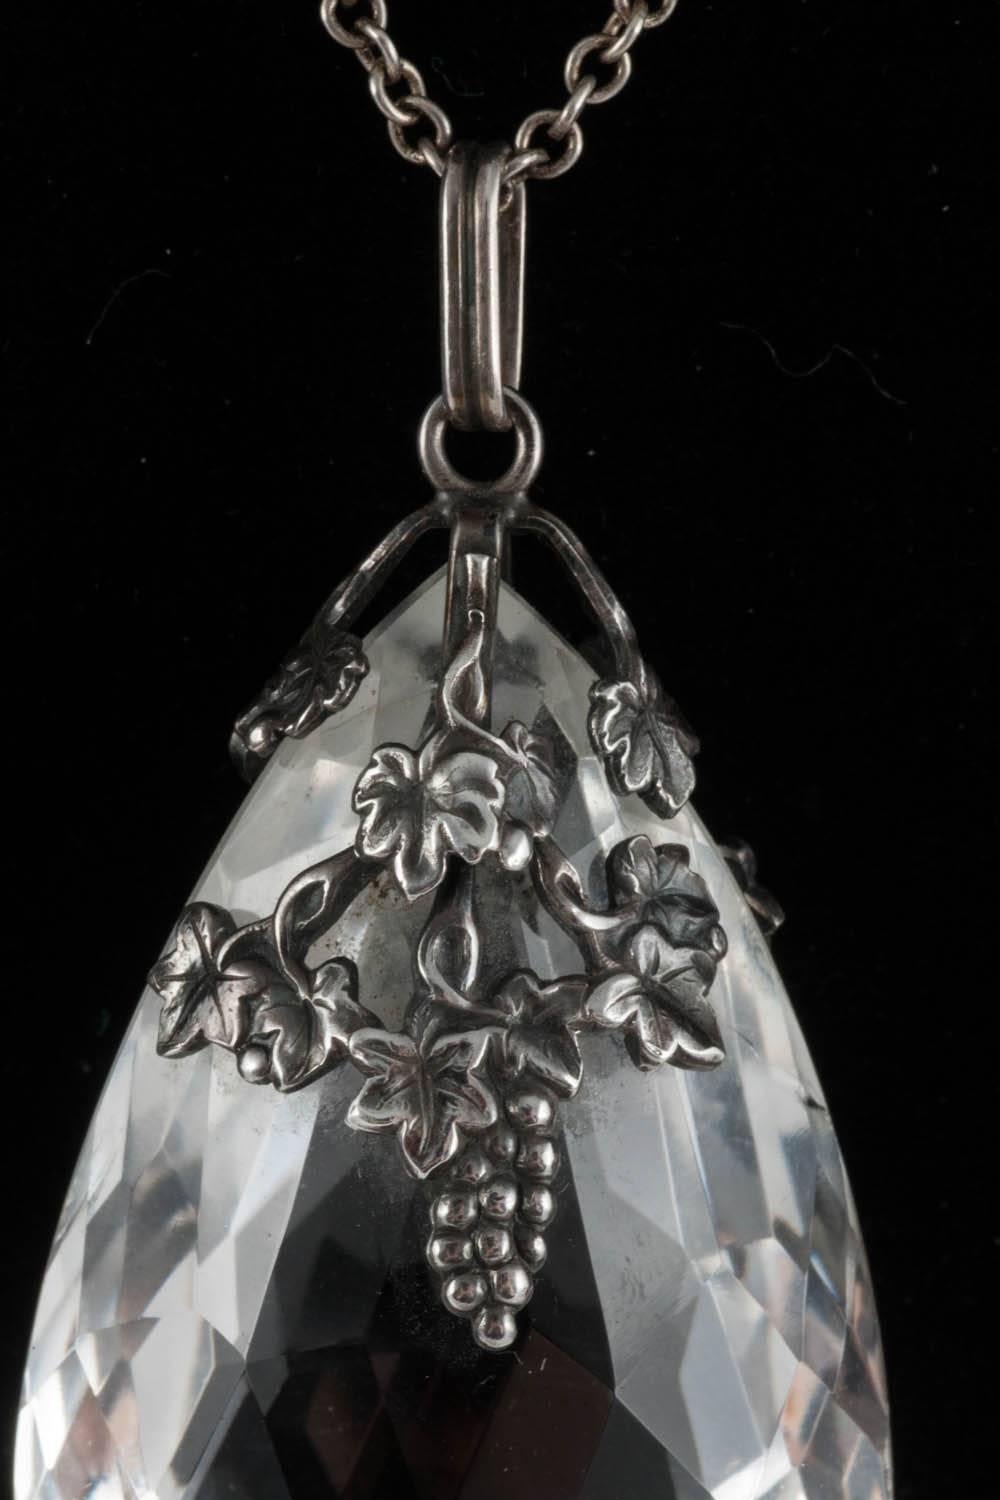 A lovely necklace for Autumn featuring very finely detailed vine leaves and bunches of grapes encasing a large faceted crystal pendant.Hanging from a long sterling silver chain which makes it very wearable for everyday. Both pieces test as silver